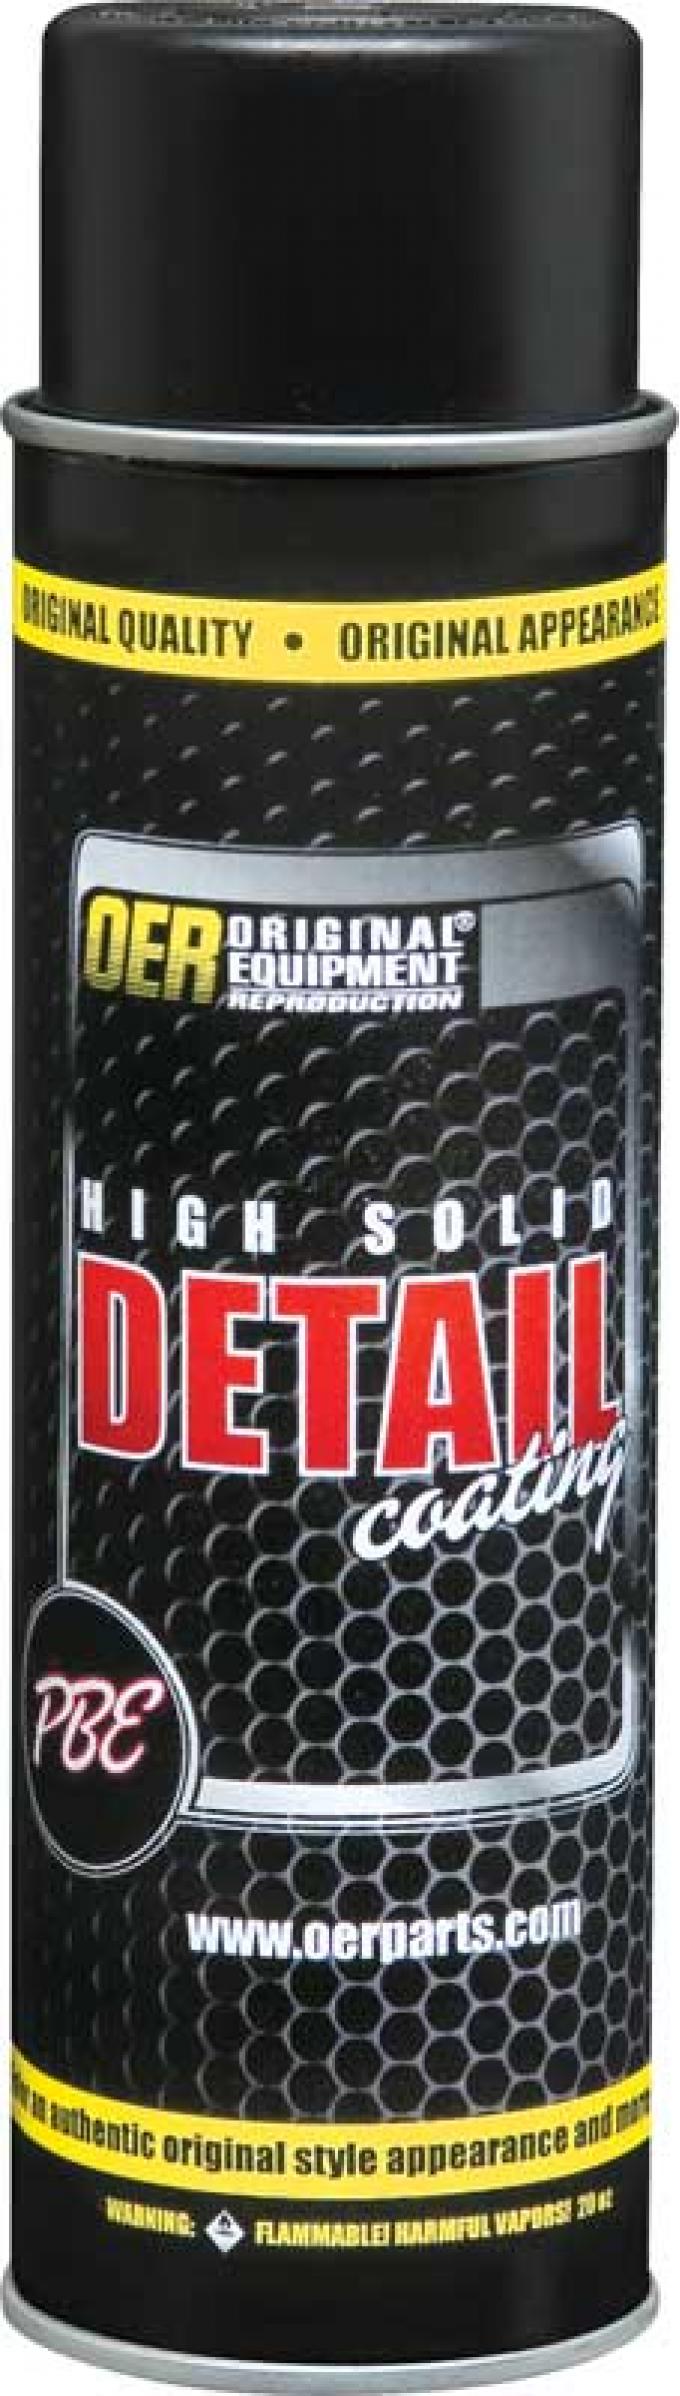 OER High Solids Stainless Steel Detail Coating 16 Oz Net Weight Aerosol Can K89580